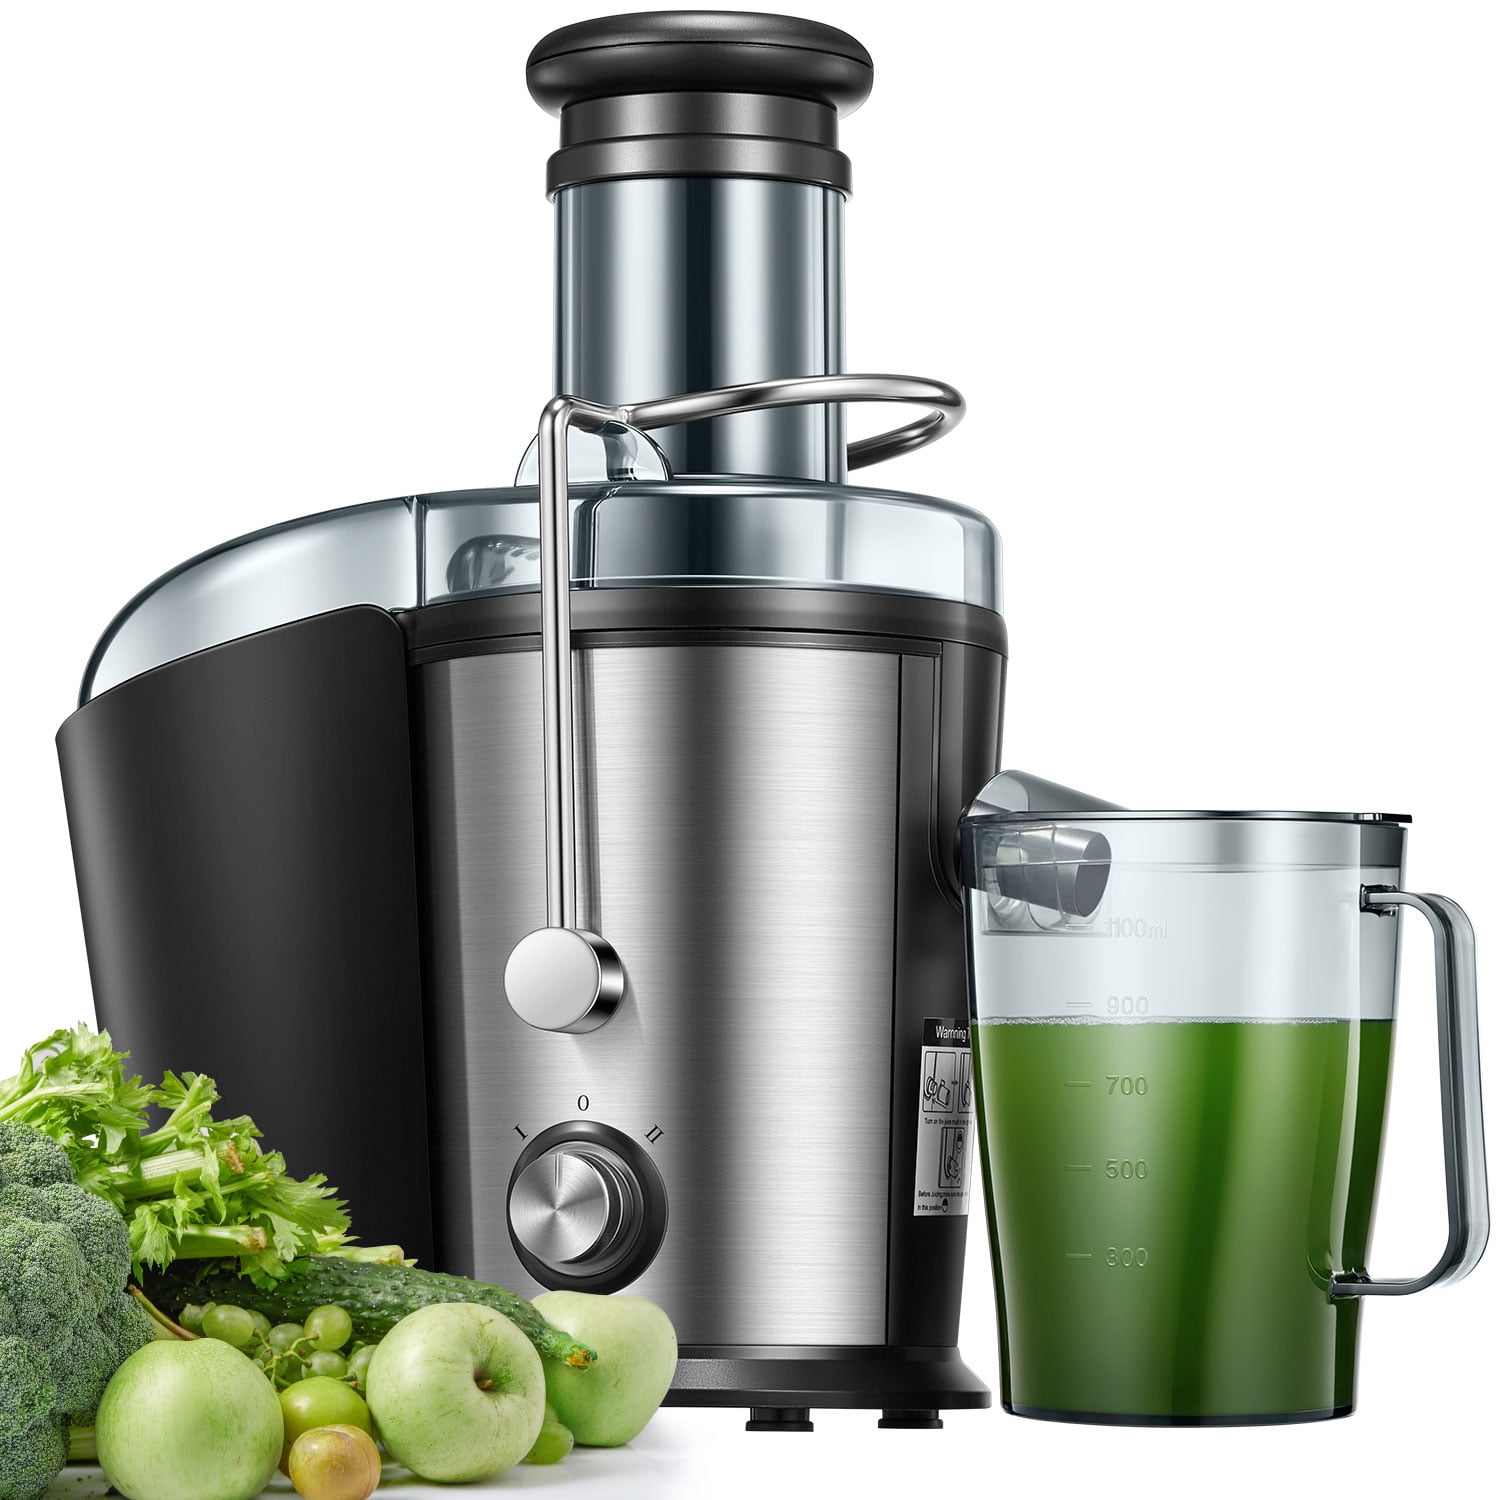 2 Speed Setting Fruit Juicer for Whole Fruit and Vegetable,BPA-Free,Non-Slip Feet Juicer Juice Extractor Aicok 800W Juicer Machine 75MM Wide Mouth Stainless Steel Centrifugal Juicer 